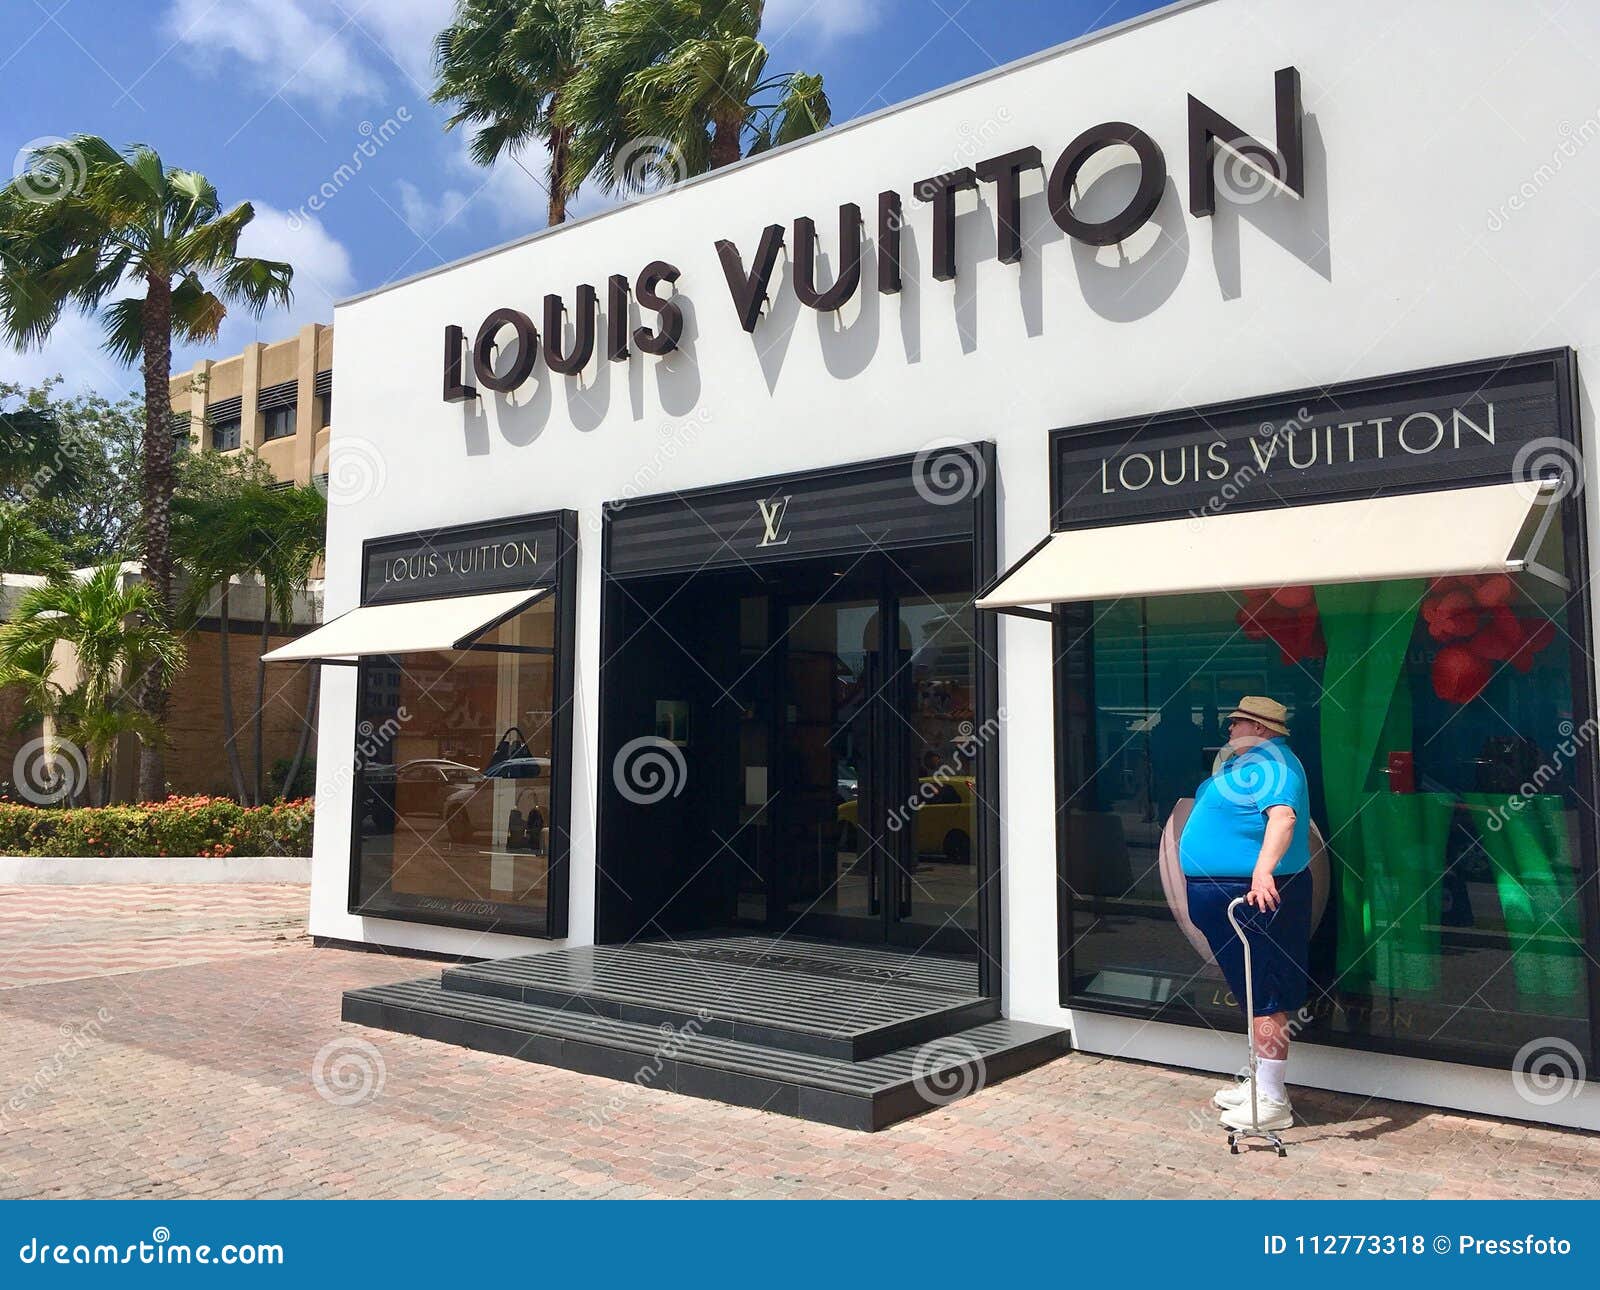 Louis Vuitton Brand Store In Aruba Editorial Stock Photo - Image of brand, clothing: 112773318